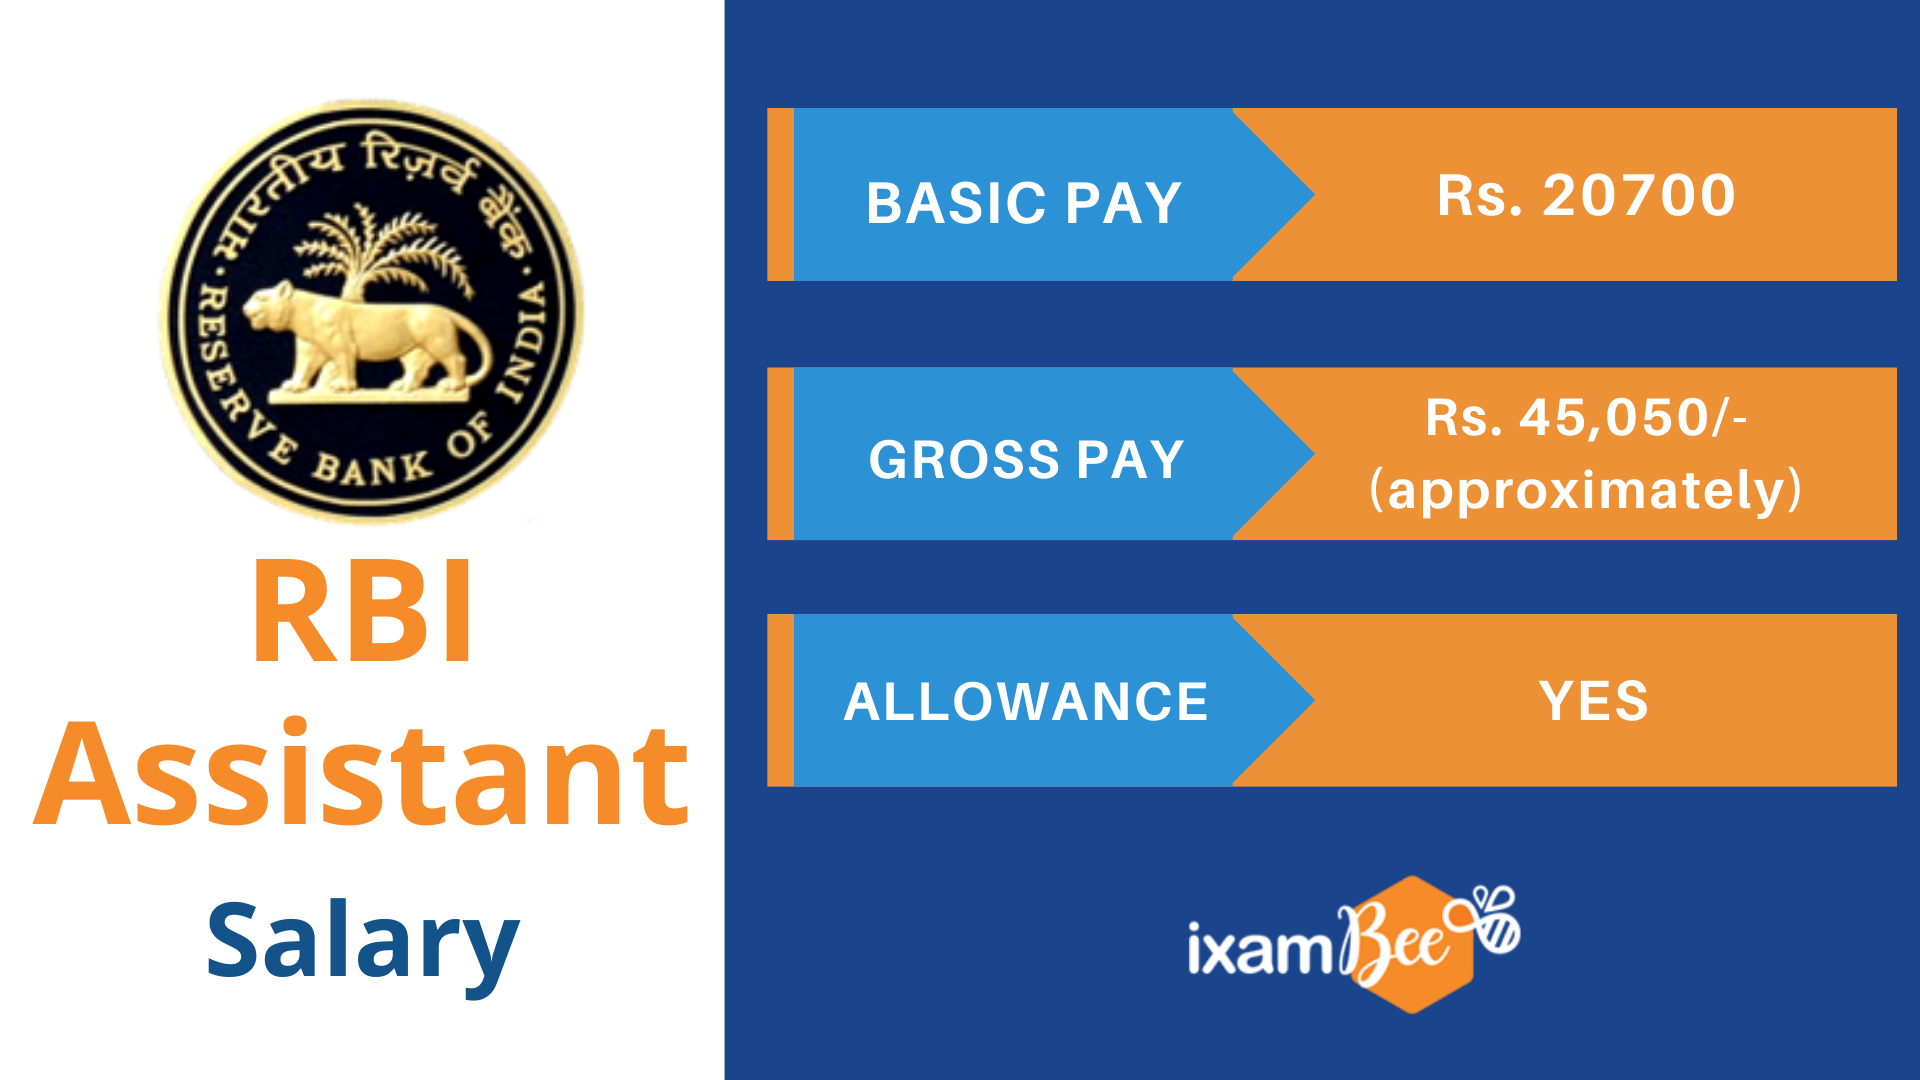 RBI Assistant Salary